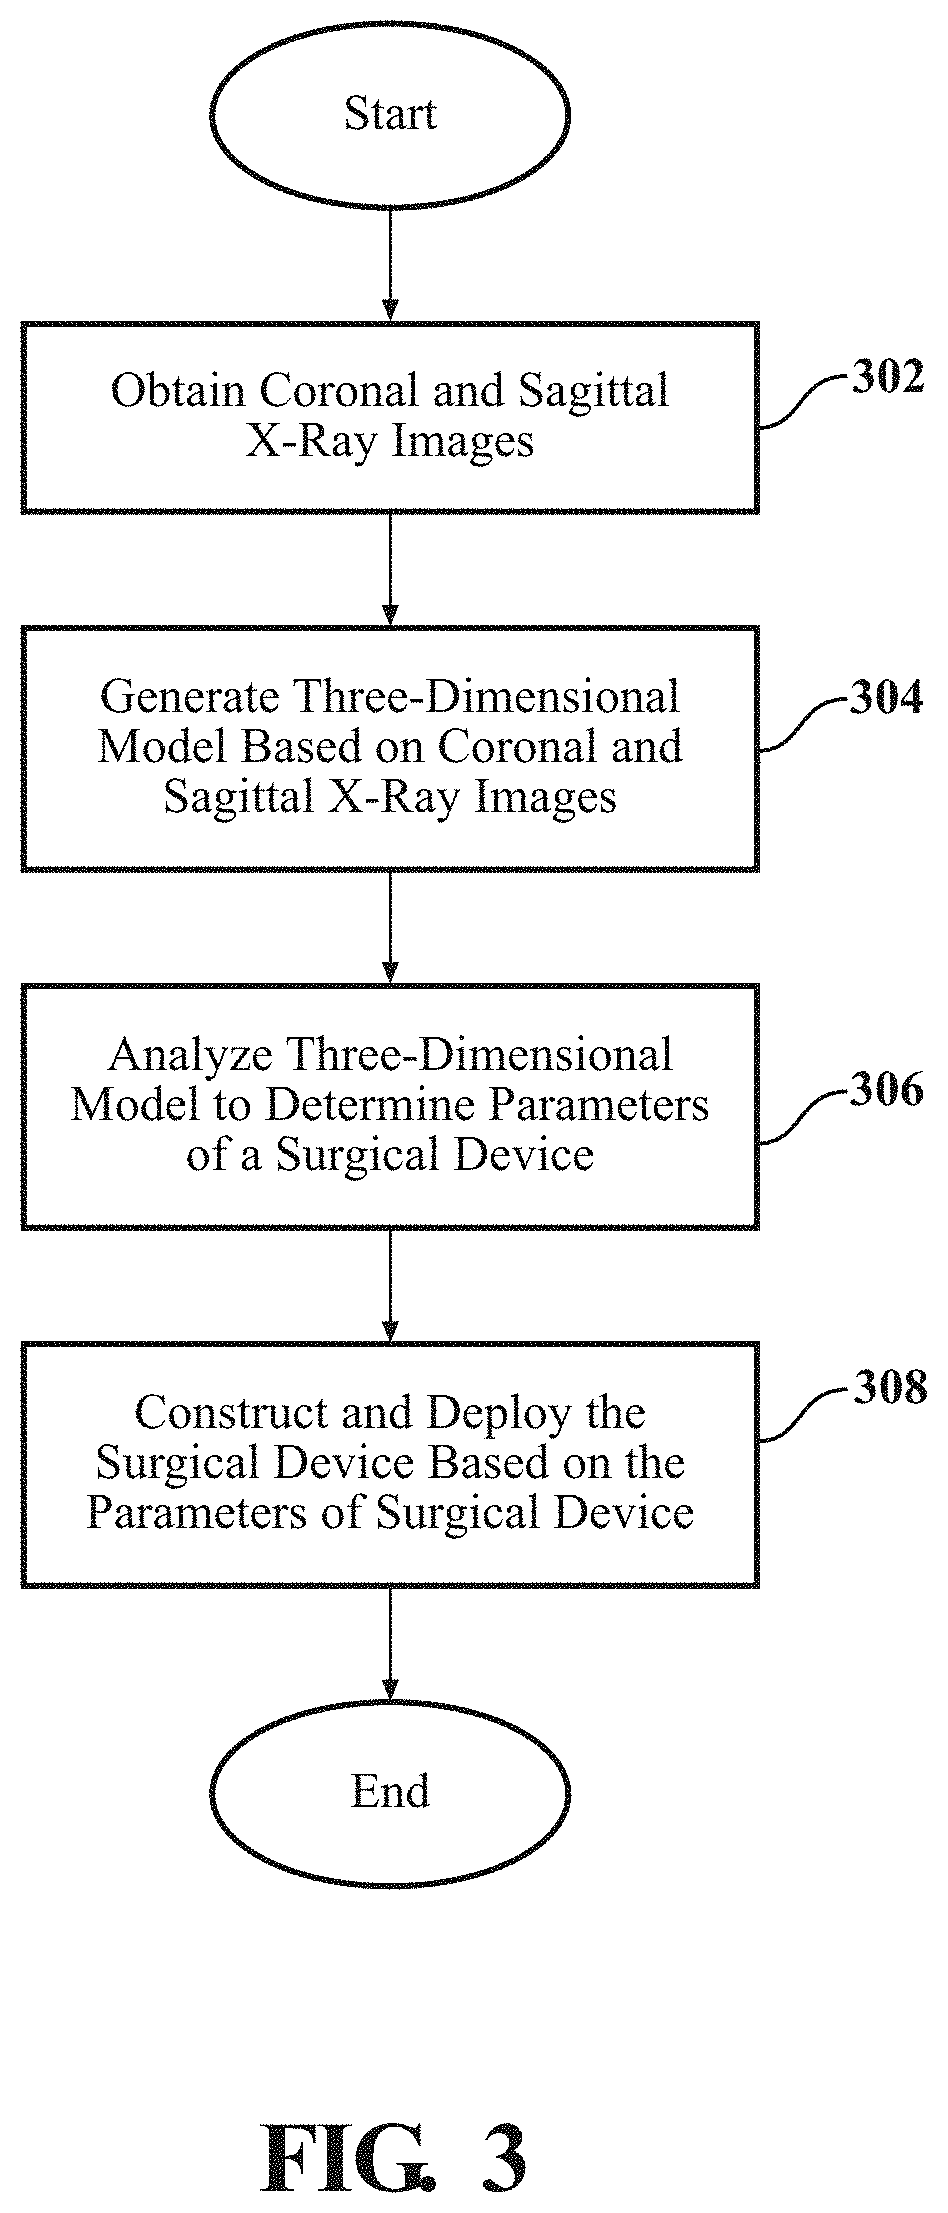 Systems And Methods For Modeling Spines And Treating Spines Based On Spine Models